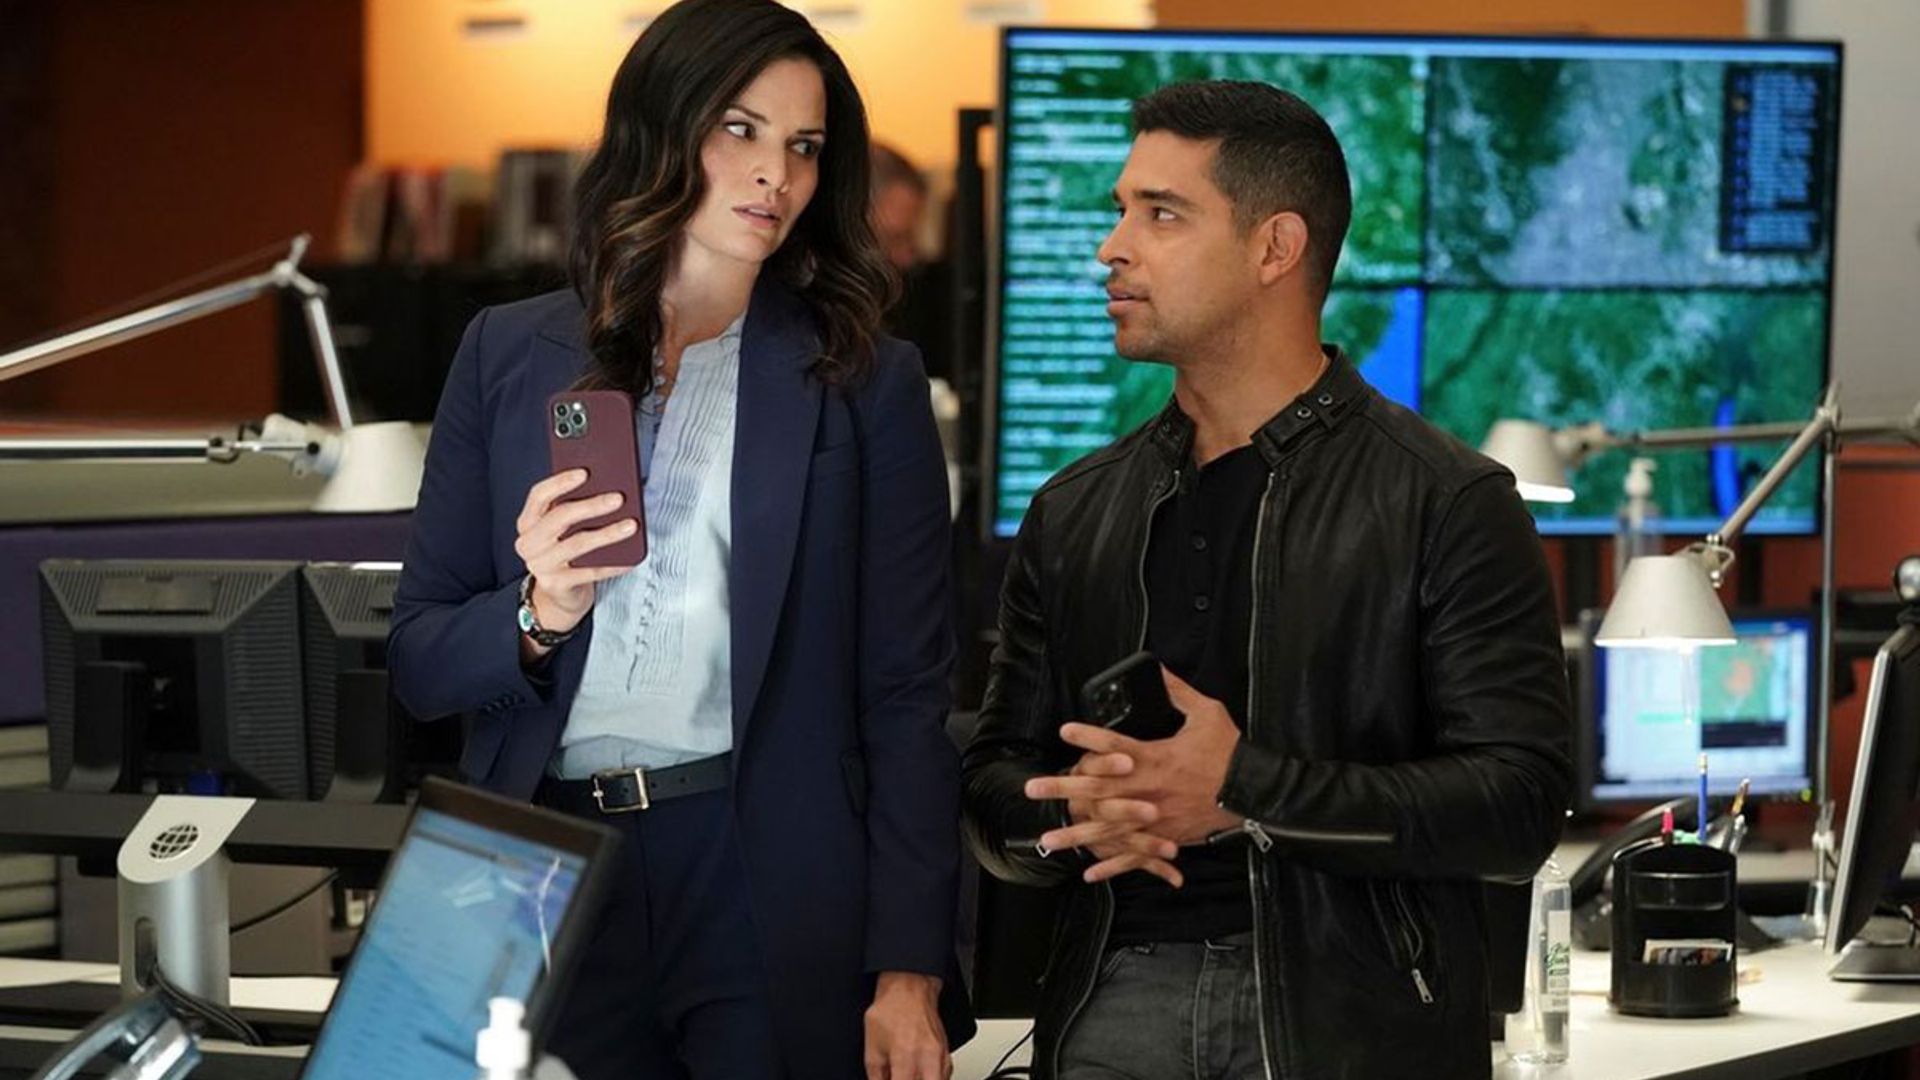 NCIS stars spill details on major upcoming crossover episode with NCIS: Hawai'i